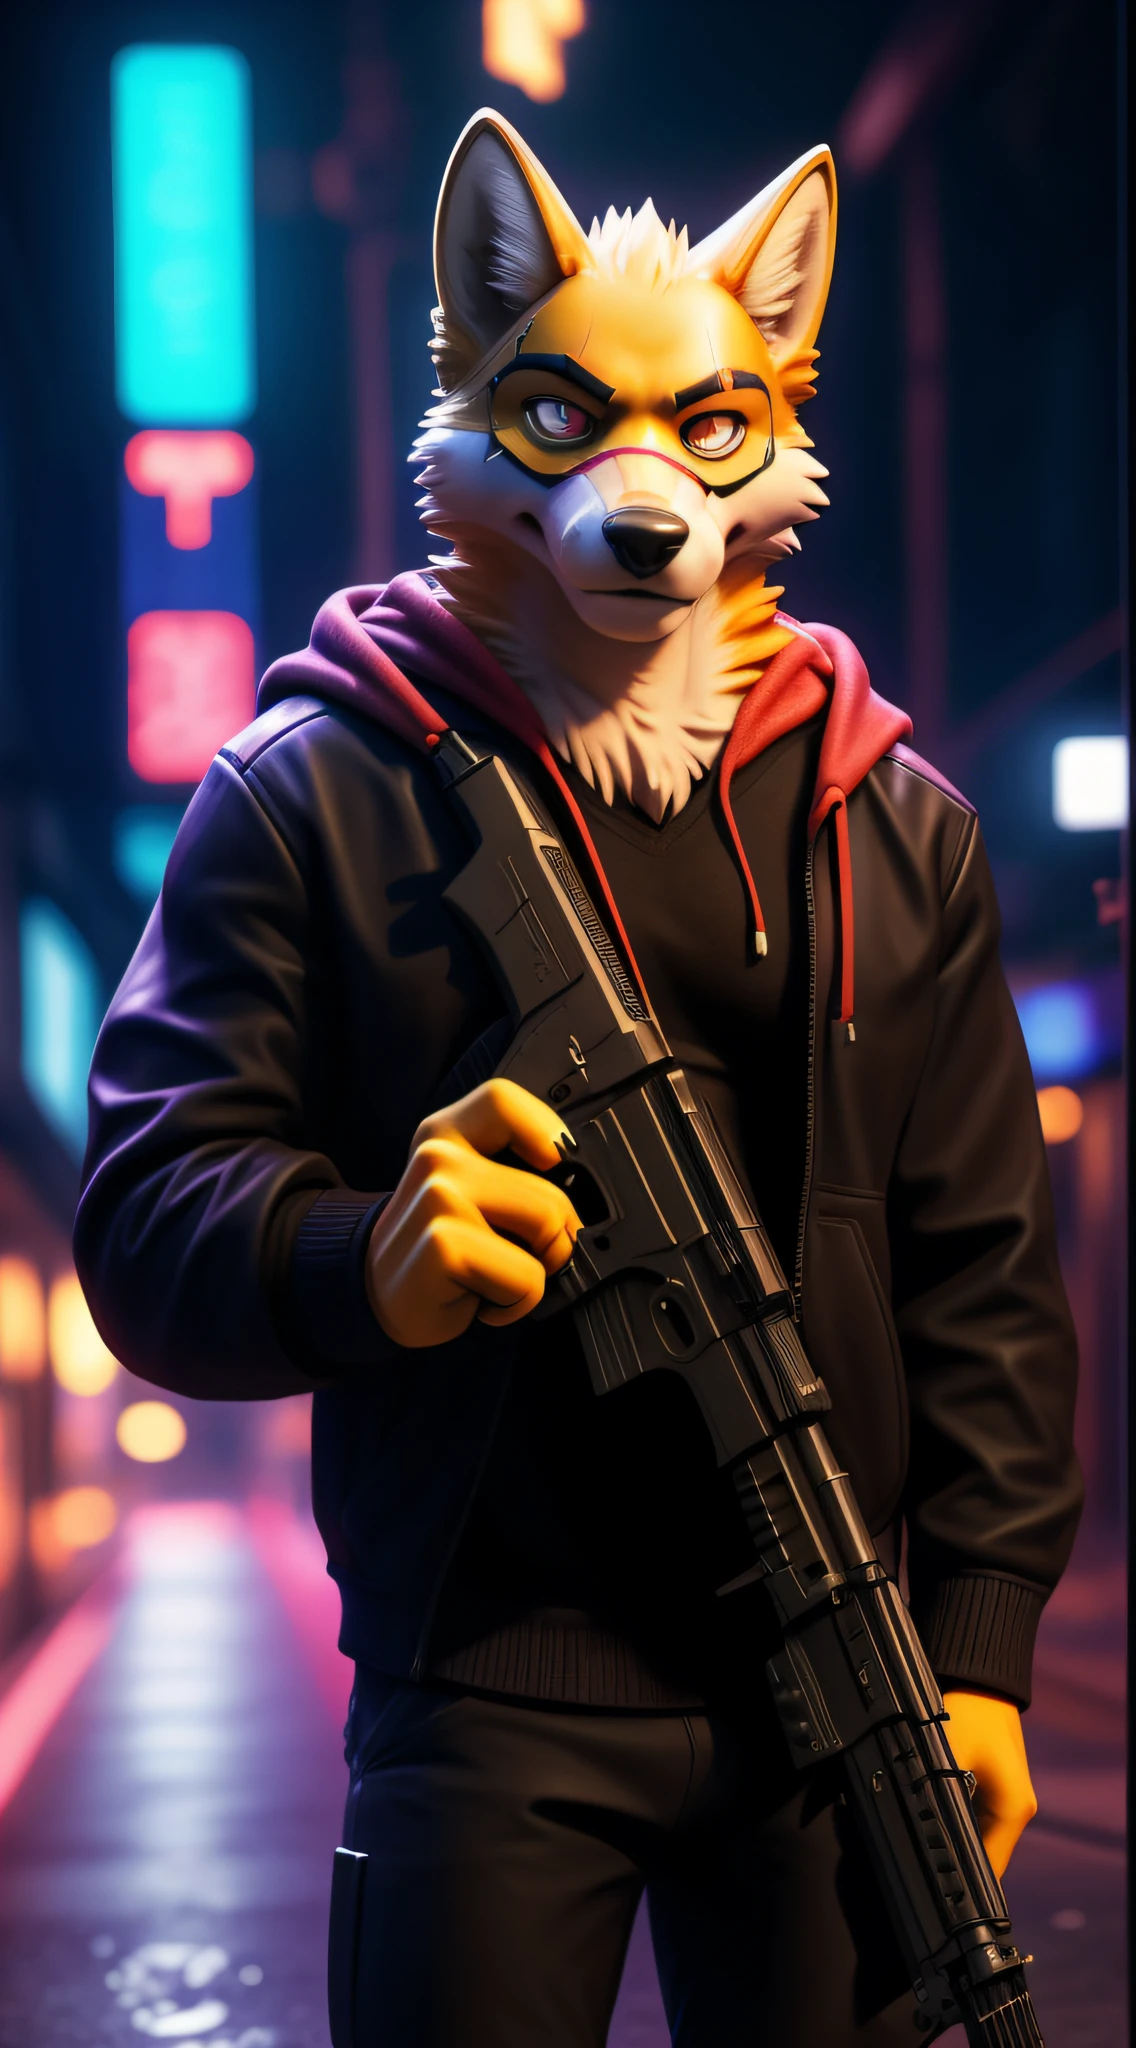 there is a man in a fox mask holding a gun, rendered in sfm, hyper detailed full body shot, super detailed rendering, SFM rendering, rendered in redshift, Cinematic bust shot, fully detailed rendering, high detailed full body, furry character, detailed cinematic rendering, with cinematic lighting, cinematic full character, extra detailed body, hyper realistic style, detailed portrait shot